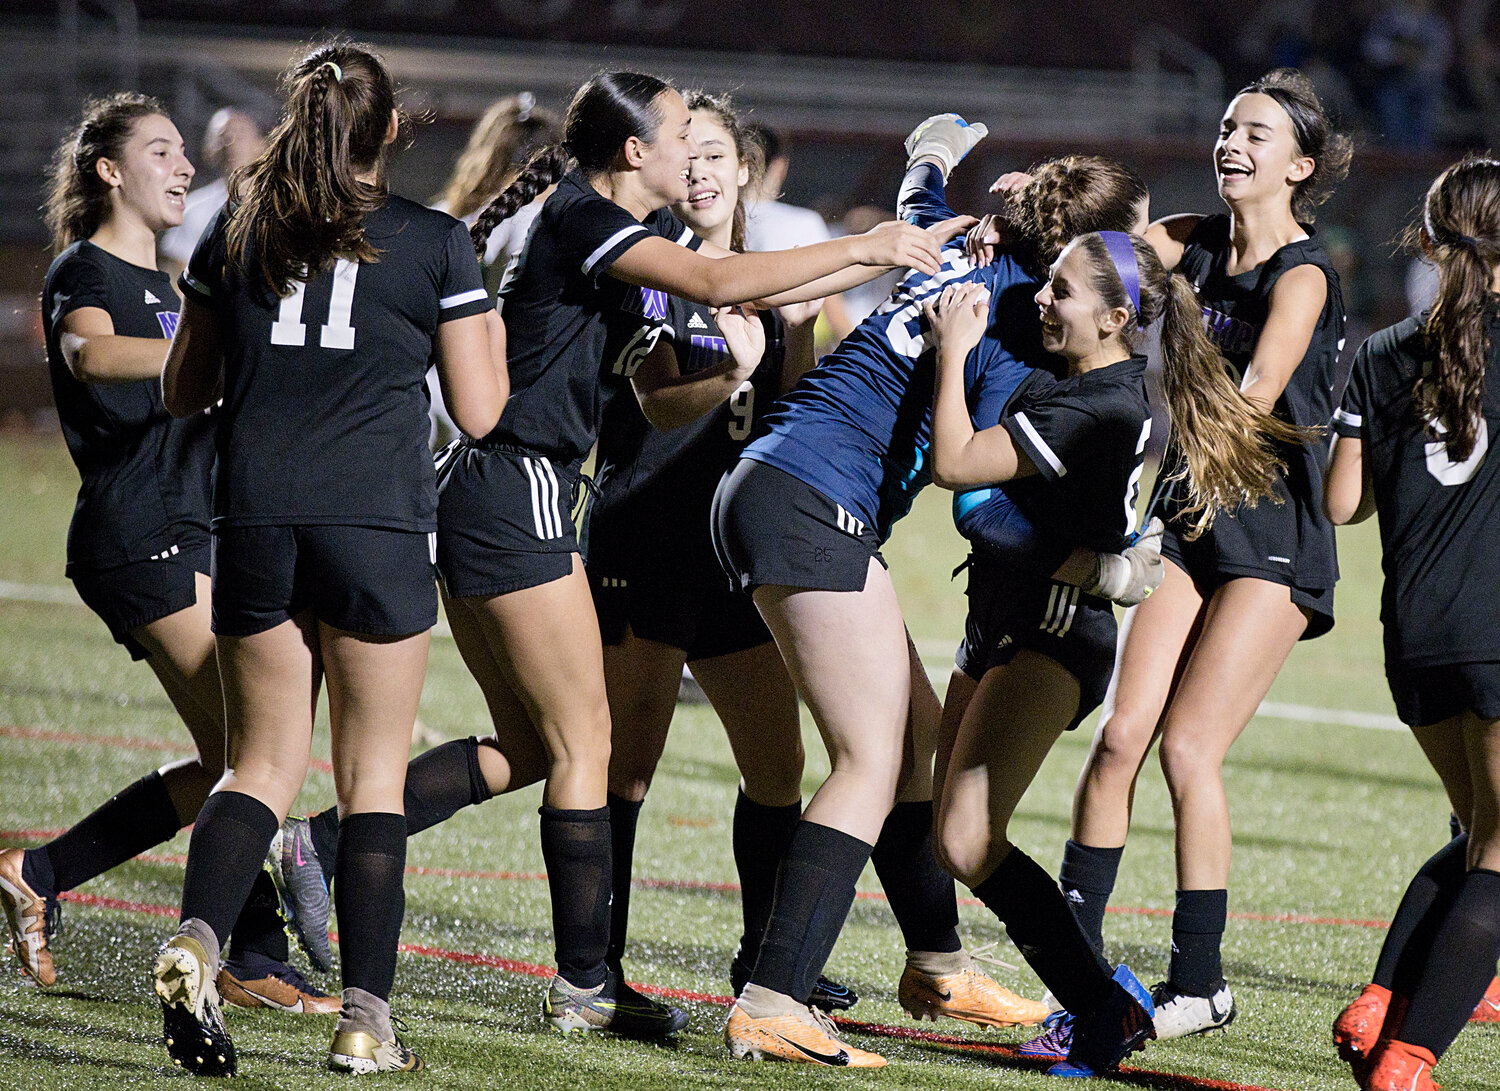 The Huskies celebrate a 1-0 win against Chariho in the Division I semifinals, Tuesday. They will play Cumberland in the state championship at Rhode Island College on Saturday.